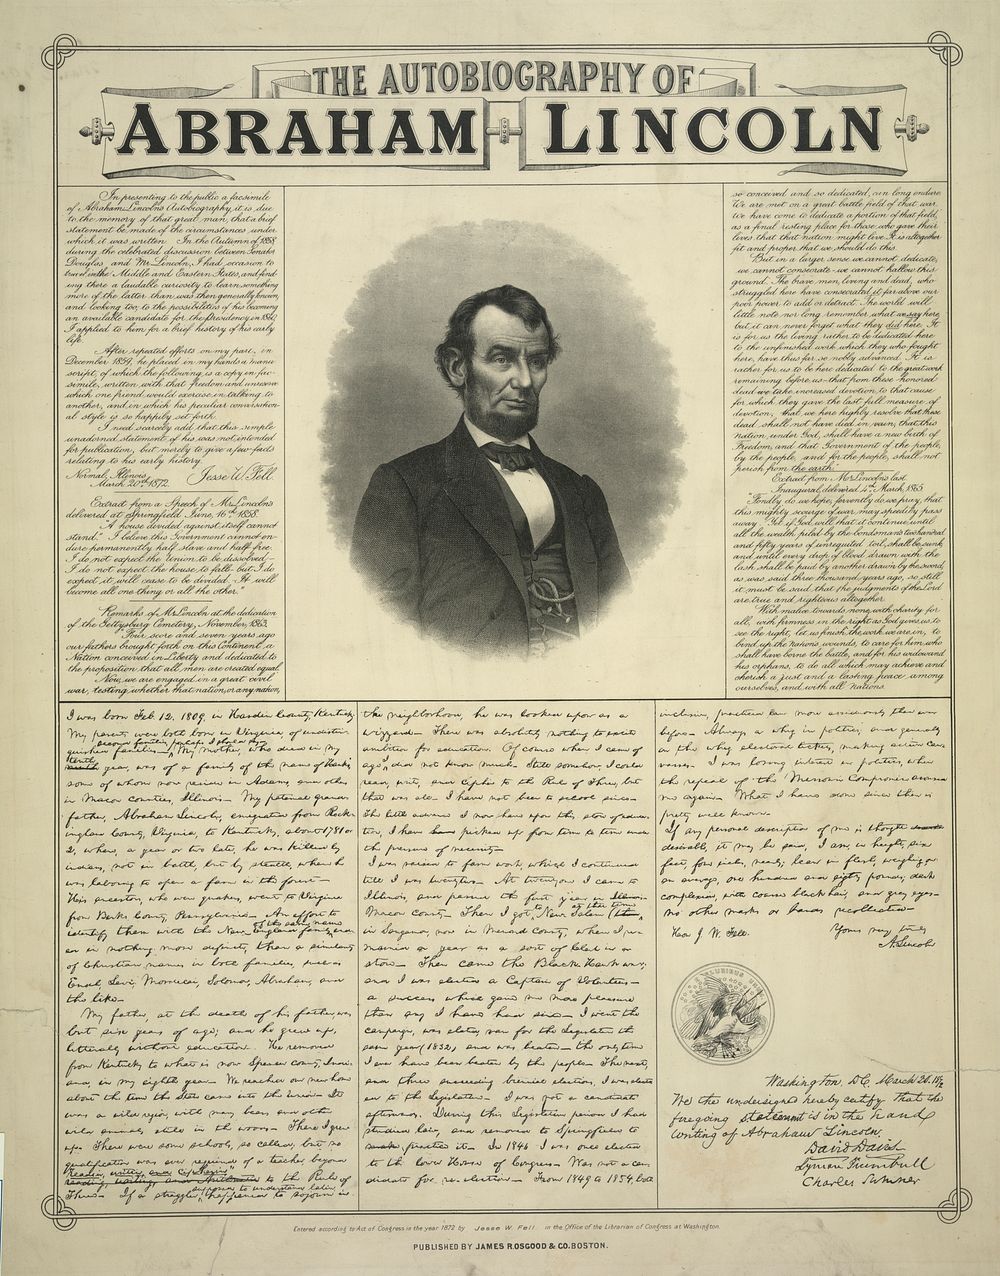 The autobiography of Abraham Lincoln. Original from the Library of Congress. Digitally enhanced by rawpixel.